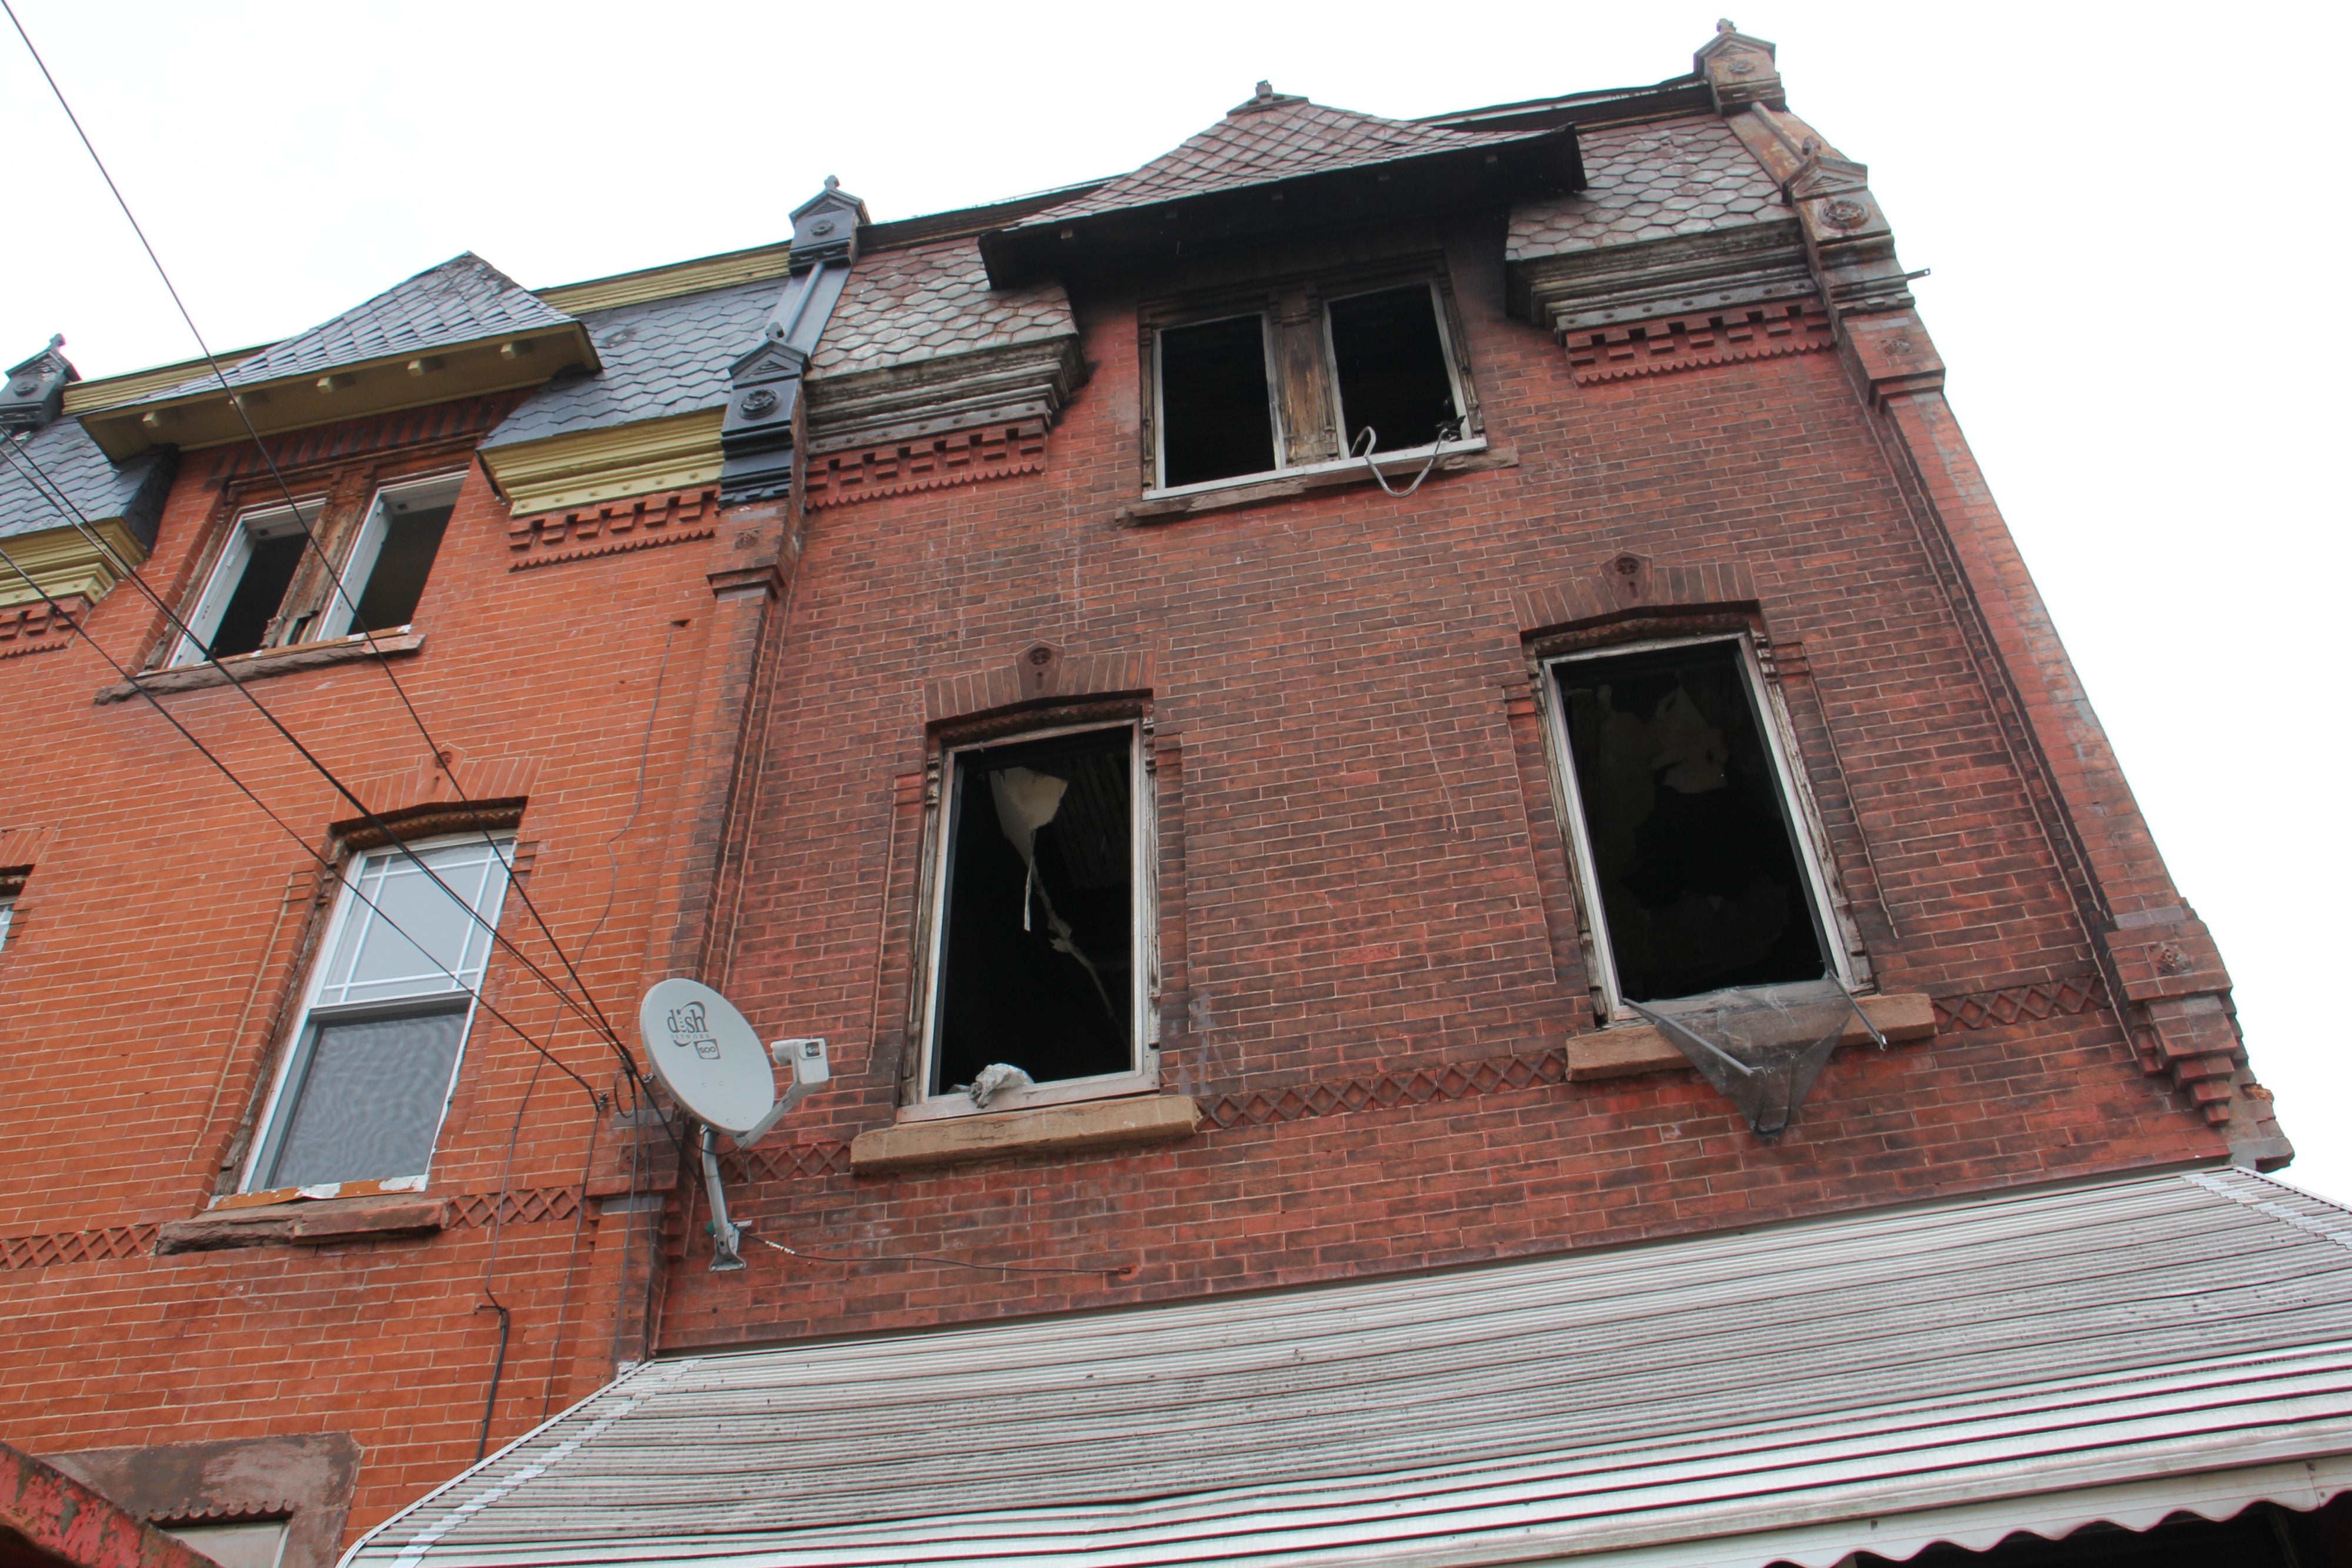 The deadly fire that engulfed 1855 N. 21st St. began on the second floor. 